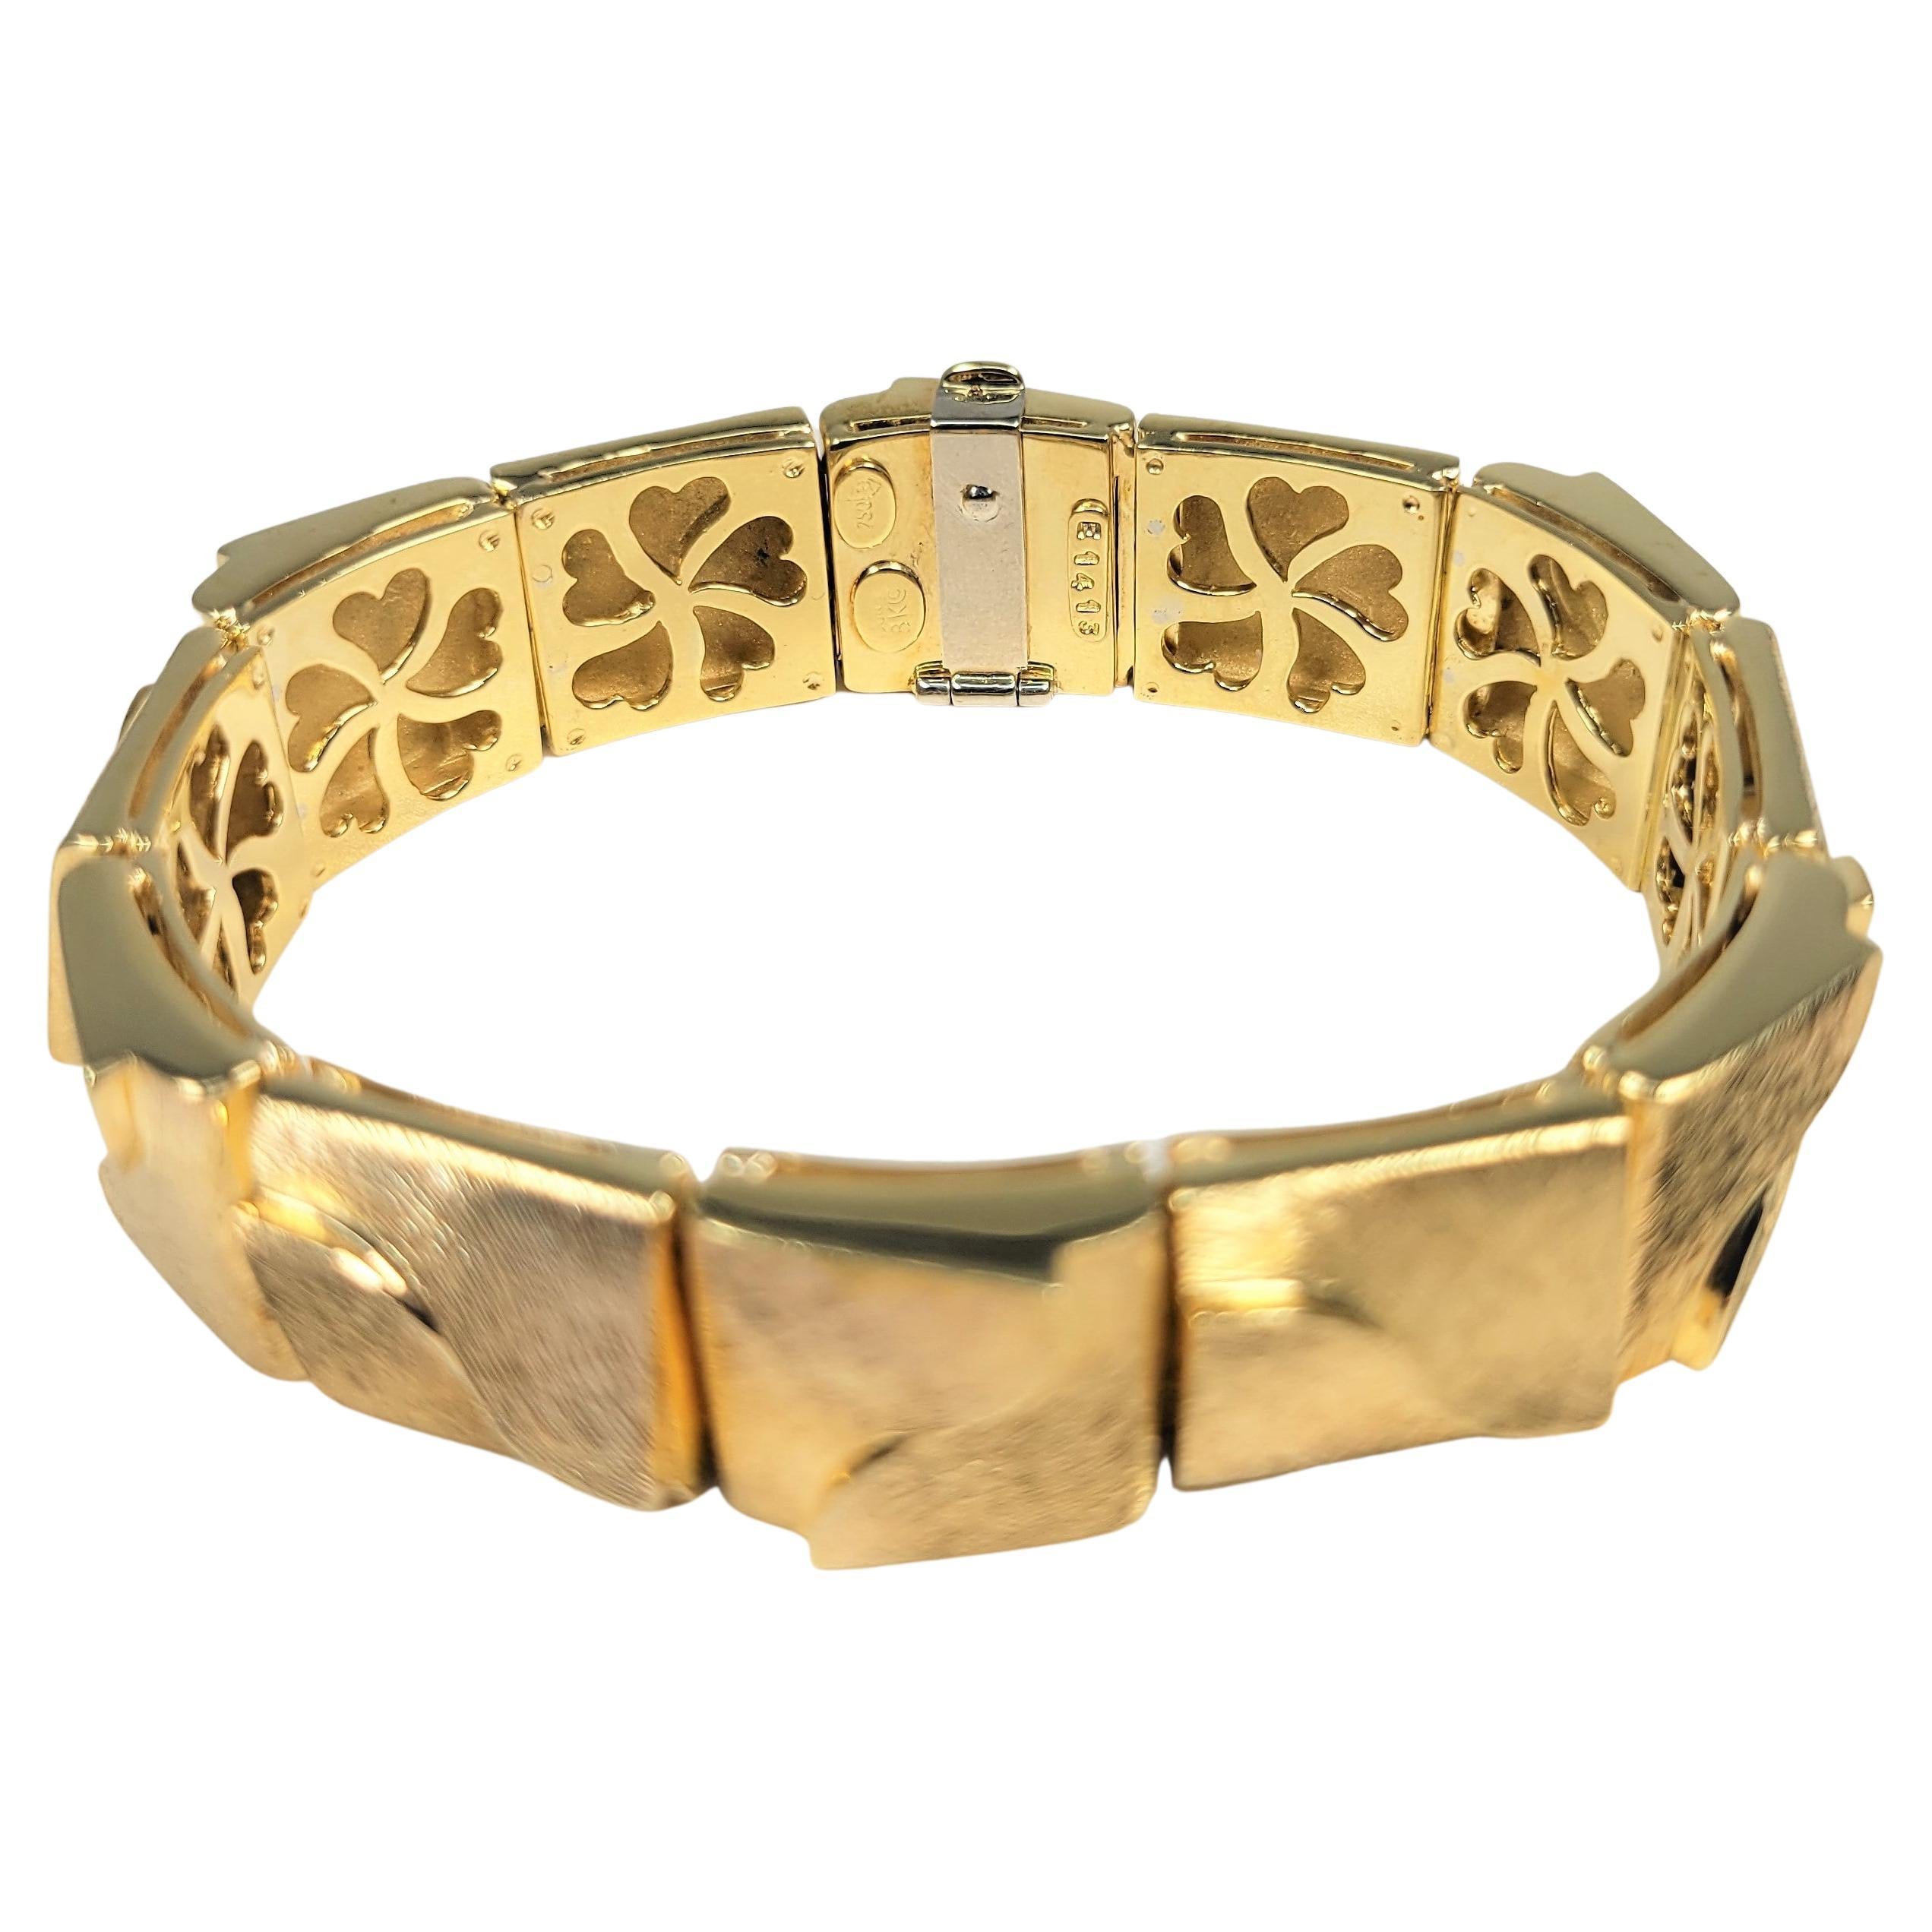 Henry Dunay Textured Yellow Gold Bracelet